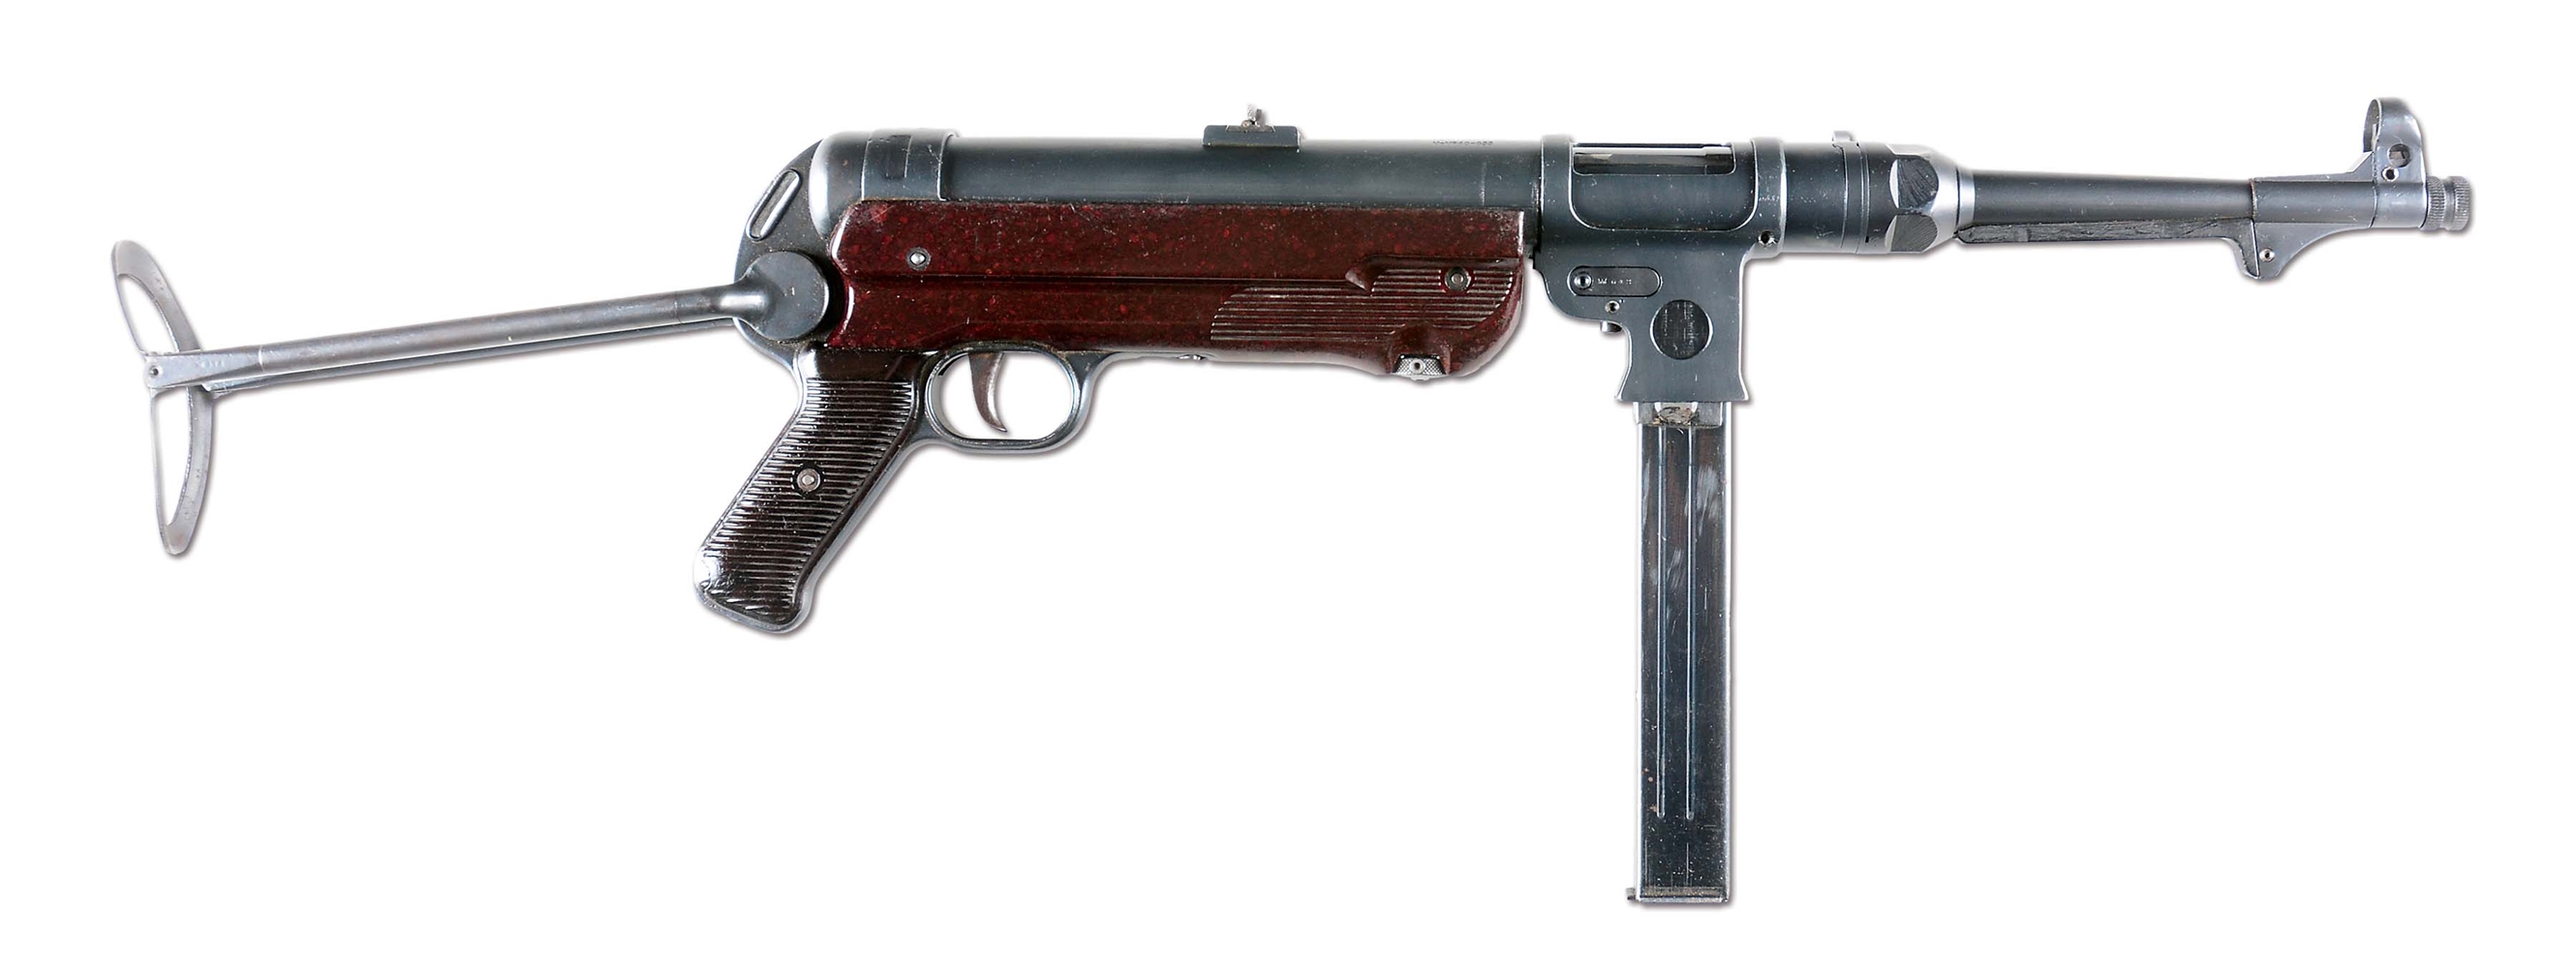 (N) ATTRACTIVE GERMAN MP-40 MACHINE GUN ON REGISTERED AUTOMATIC WEAPONS COMPANY TUBE (FULLY TRANSFERABLE).